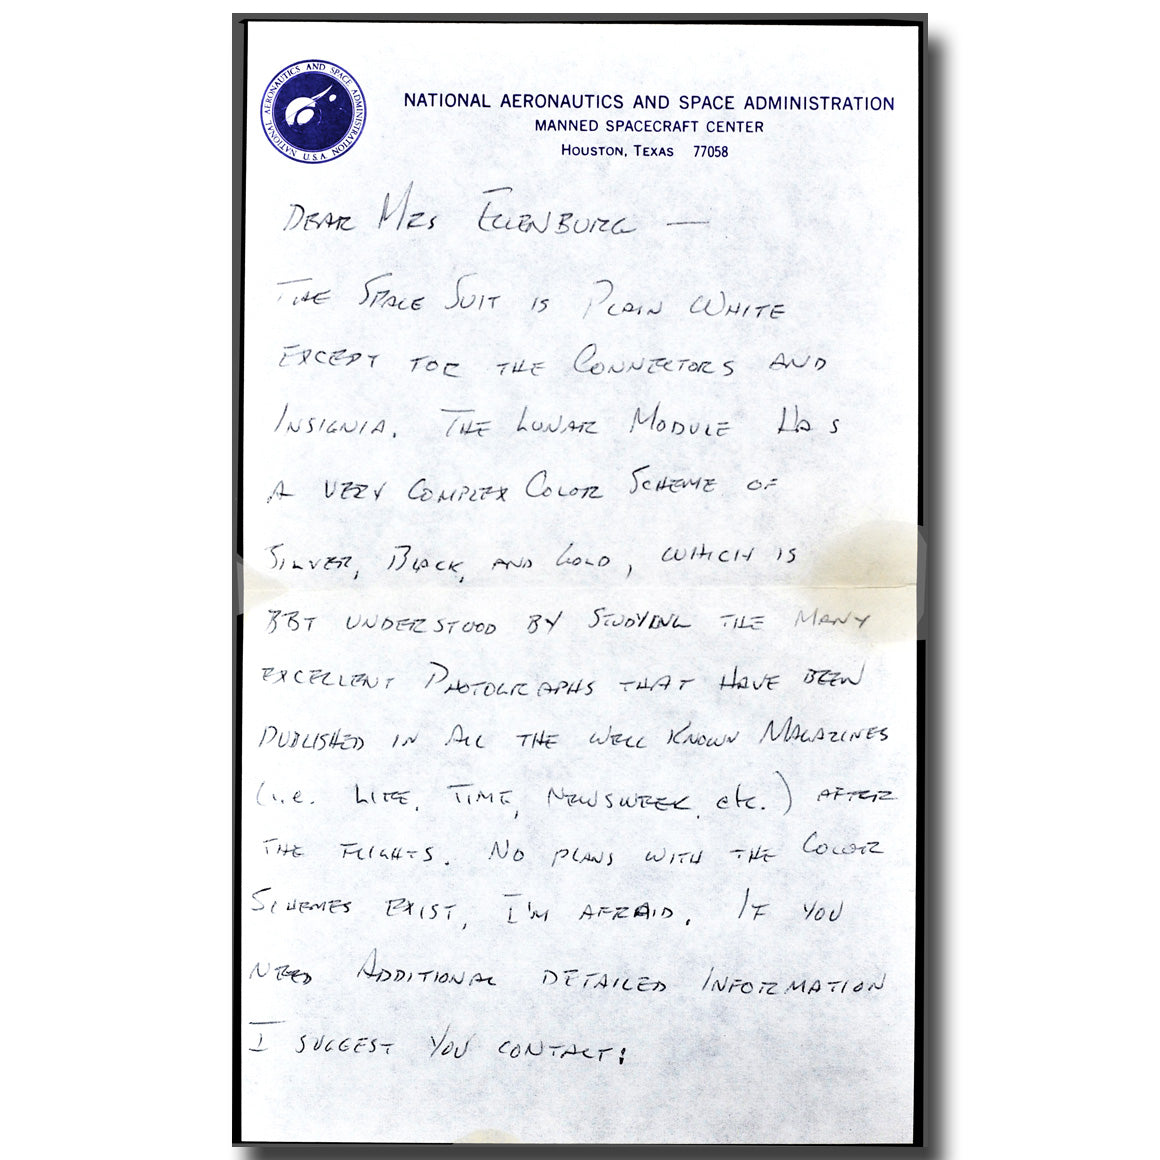 Neil Armstrong - 2-page handwritten letter with Apollo 11 content